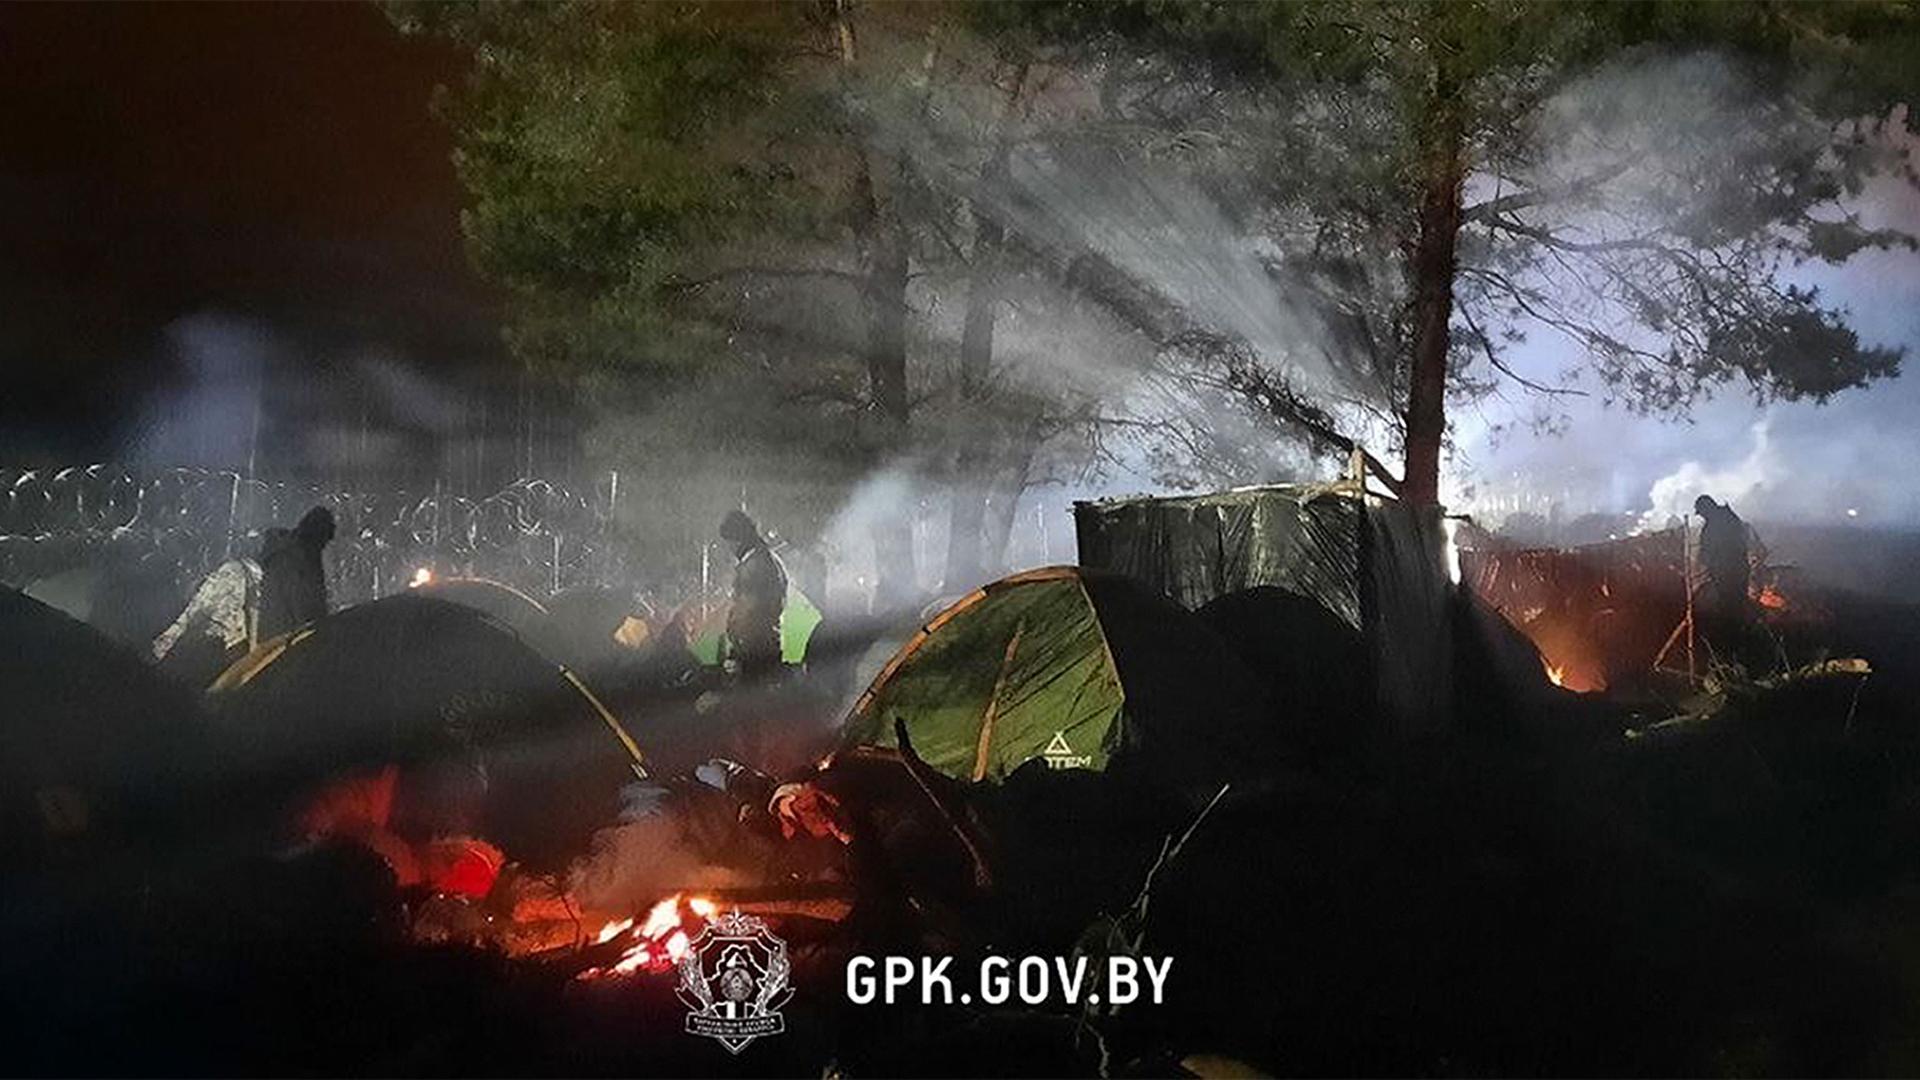 A view of a tent camp set by migrants from the Middle East and elsewhere gathering at the Belarus-Poland border near Grodno, Belarus